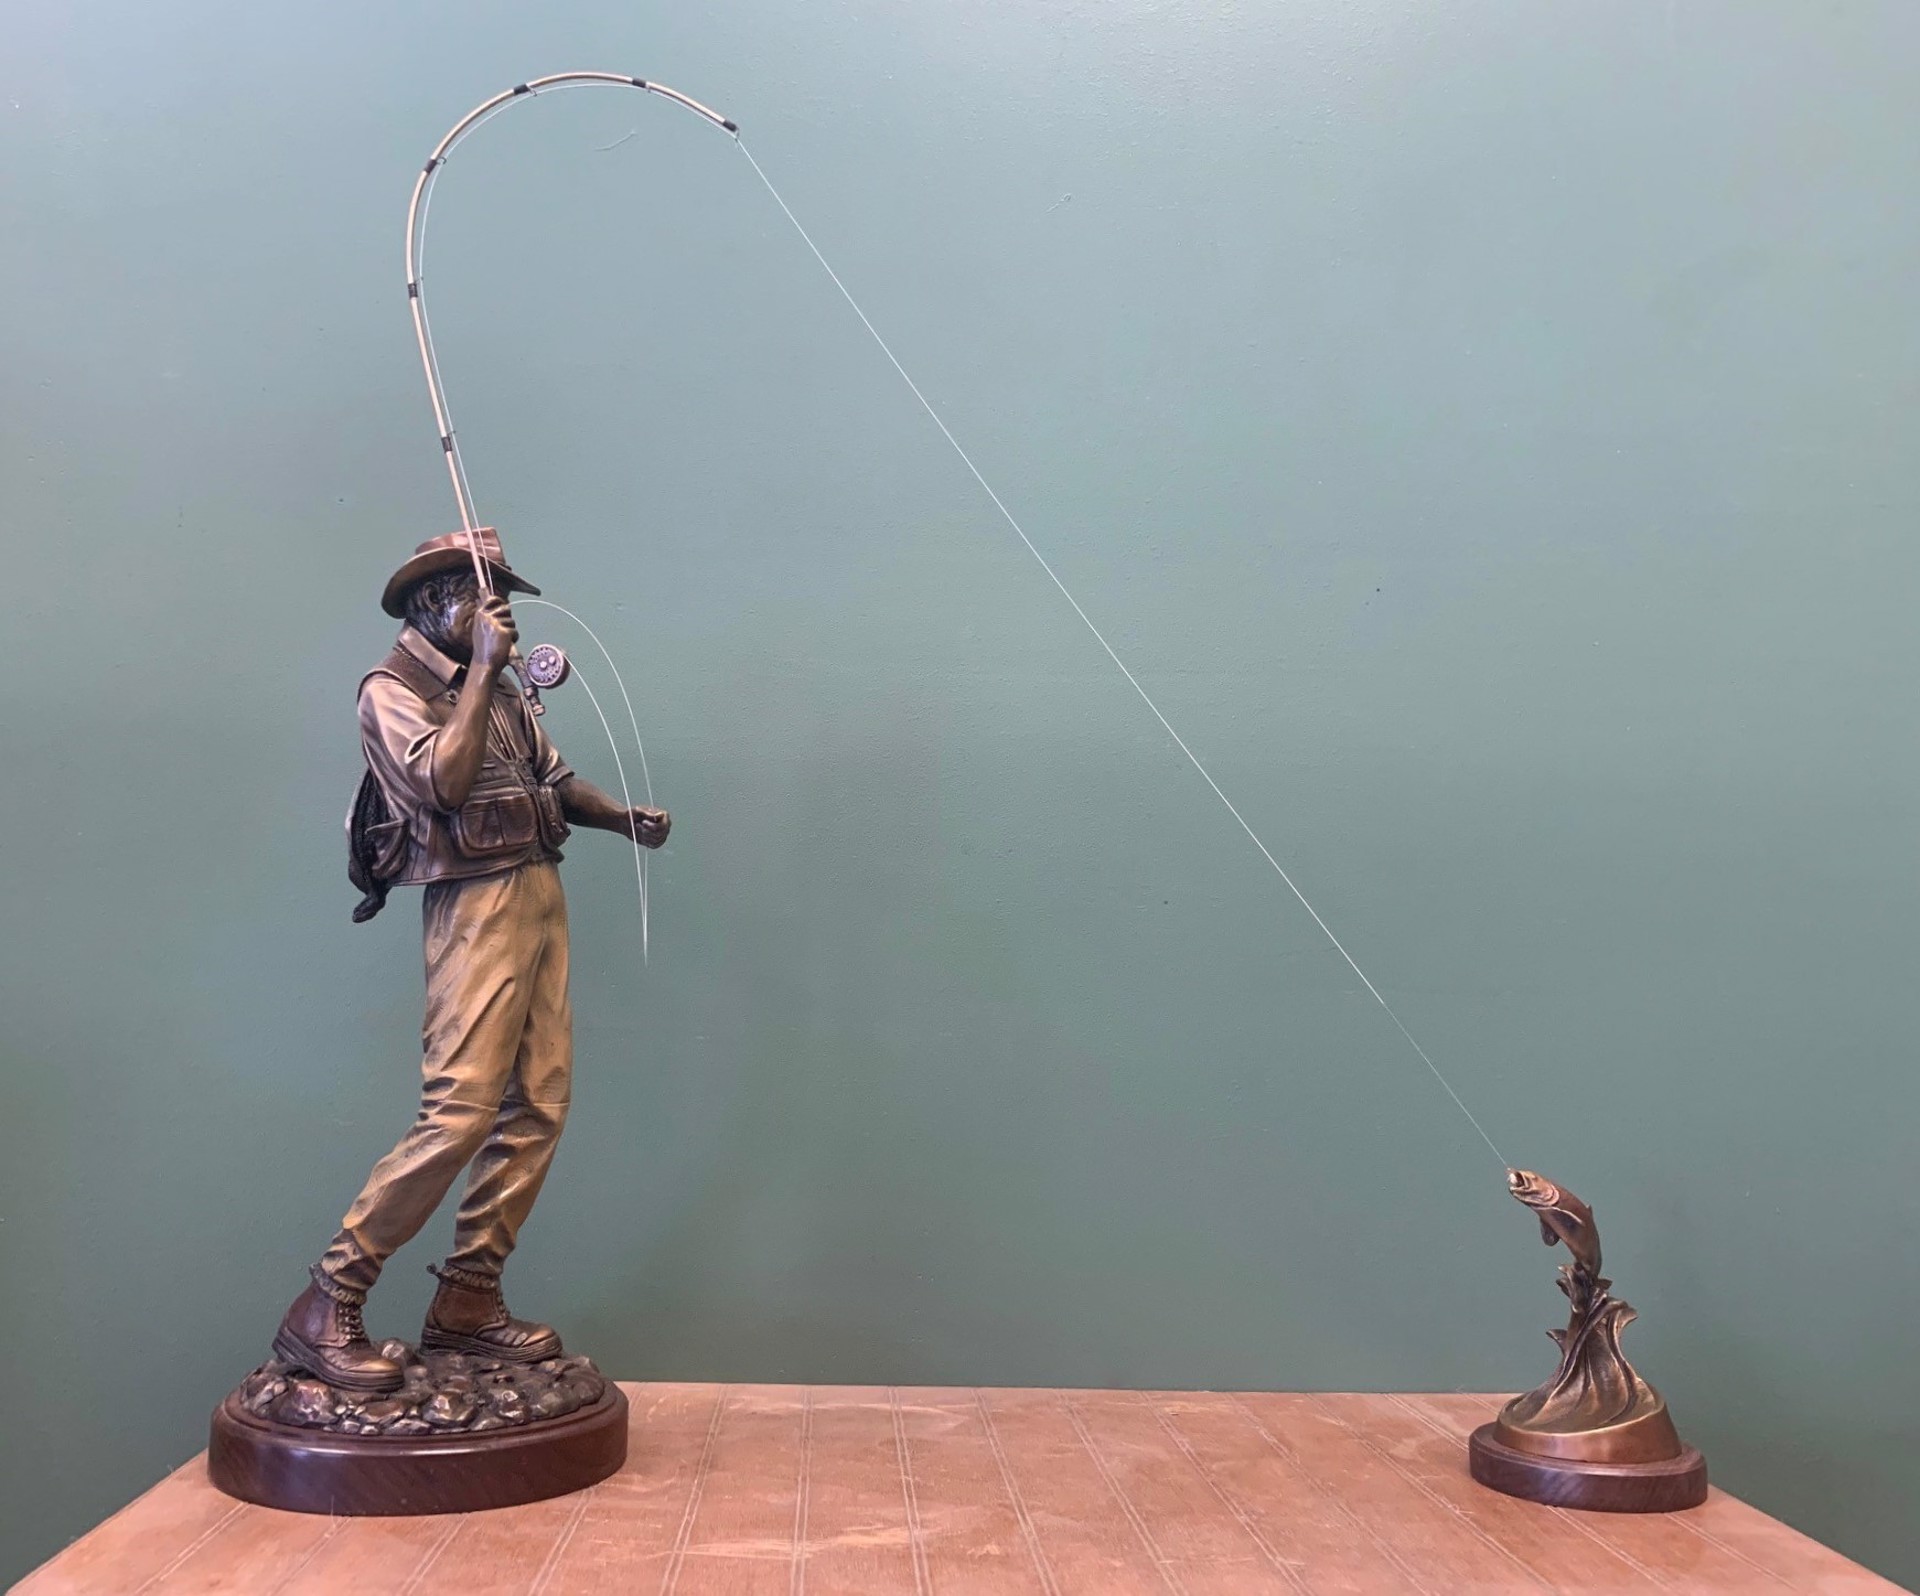 Hooked (Small) by George & Mark Lundeen